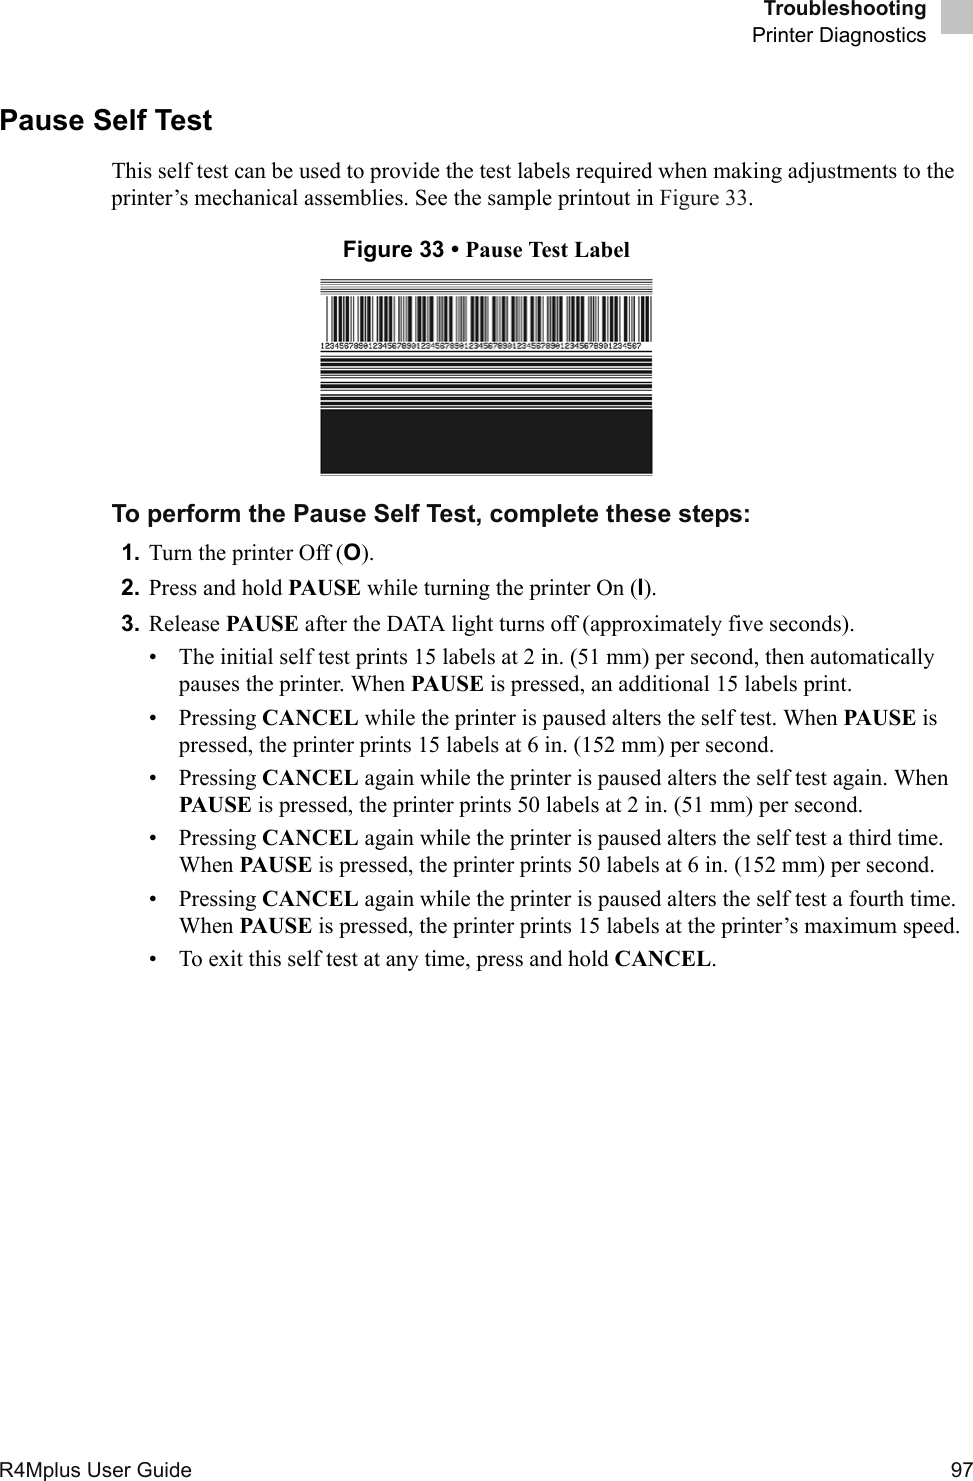 TroubleshootingPrinter DiagnosticsR4Mplus User Guide  97Pause Self TestThis self test can be used to provide the test labels required when making adjustments to the printer’s mechanical assemblies. See the sample printout in Figure 33.Figure 33 • Pause Test LabelTo perform the Pause Self Test, complete these steps:1. Turn the printer Off (O).2. Press and hold PAUSE while turning the printer On (l).3. Release PAUSE after the DATA light turns off (approximately five seconds).• The initial self test prints 15 labels at 2 in. (51 mm) per second, then automatically pauses the printer. When PAUSE is pressed, an additional 15 labels print.• Pressing CANCEL while the printer is paused alters the self test. When PAUSE is pressed, the printer prints 15 labels at 6 in. (152 mm) per second.• Pressing CANCEL again while the printer is paused alters the self test again. When PAUSE is pressed, the printer prints 50 labels at 2 in. (51 mm) per second.• Pressing CANCEL again while the printer is paused alters the self test a third time. When PAUSE is pressed, the printer prints 50 labels at 6 in. (152 mm) per second.• Pressing CANCEL again while the printer is paused alters the self test a fourth time. When PAUSE is pressed, the printer prints 15 labels at the printer’s maximum speed.• To exit this self test at any time, press and hold CANCEL.